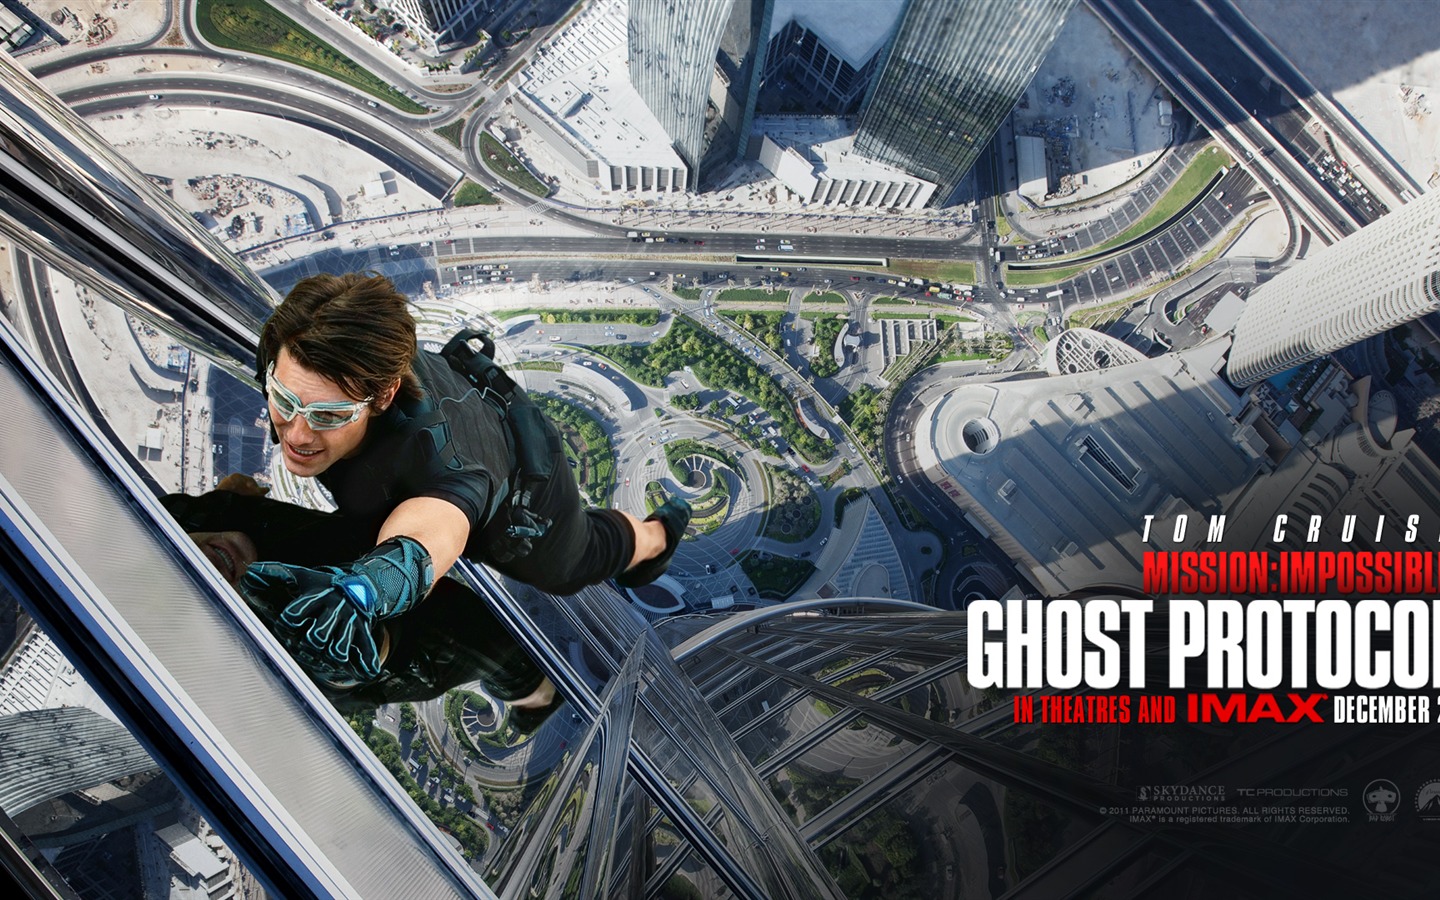 Mission: Impossible - Ghost Protocol 碟中谍4 高清壁纸10 - 1440x900